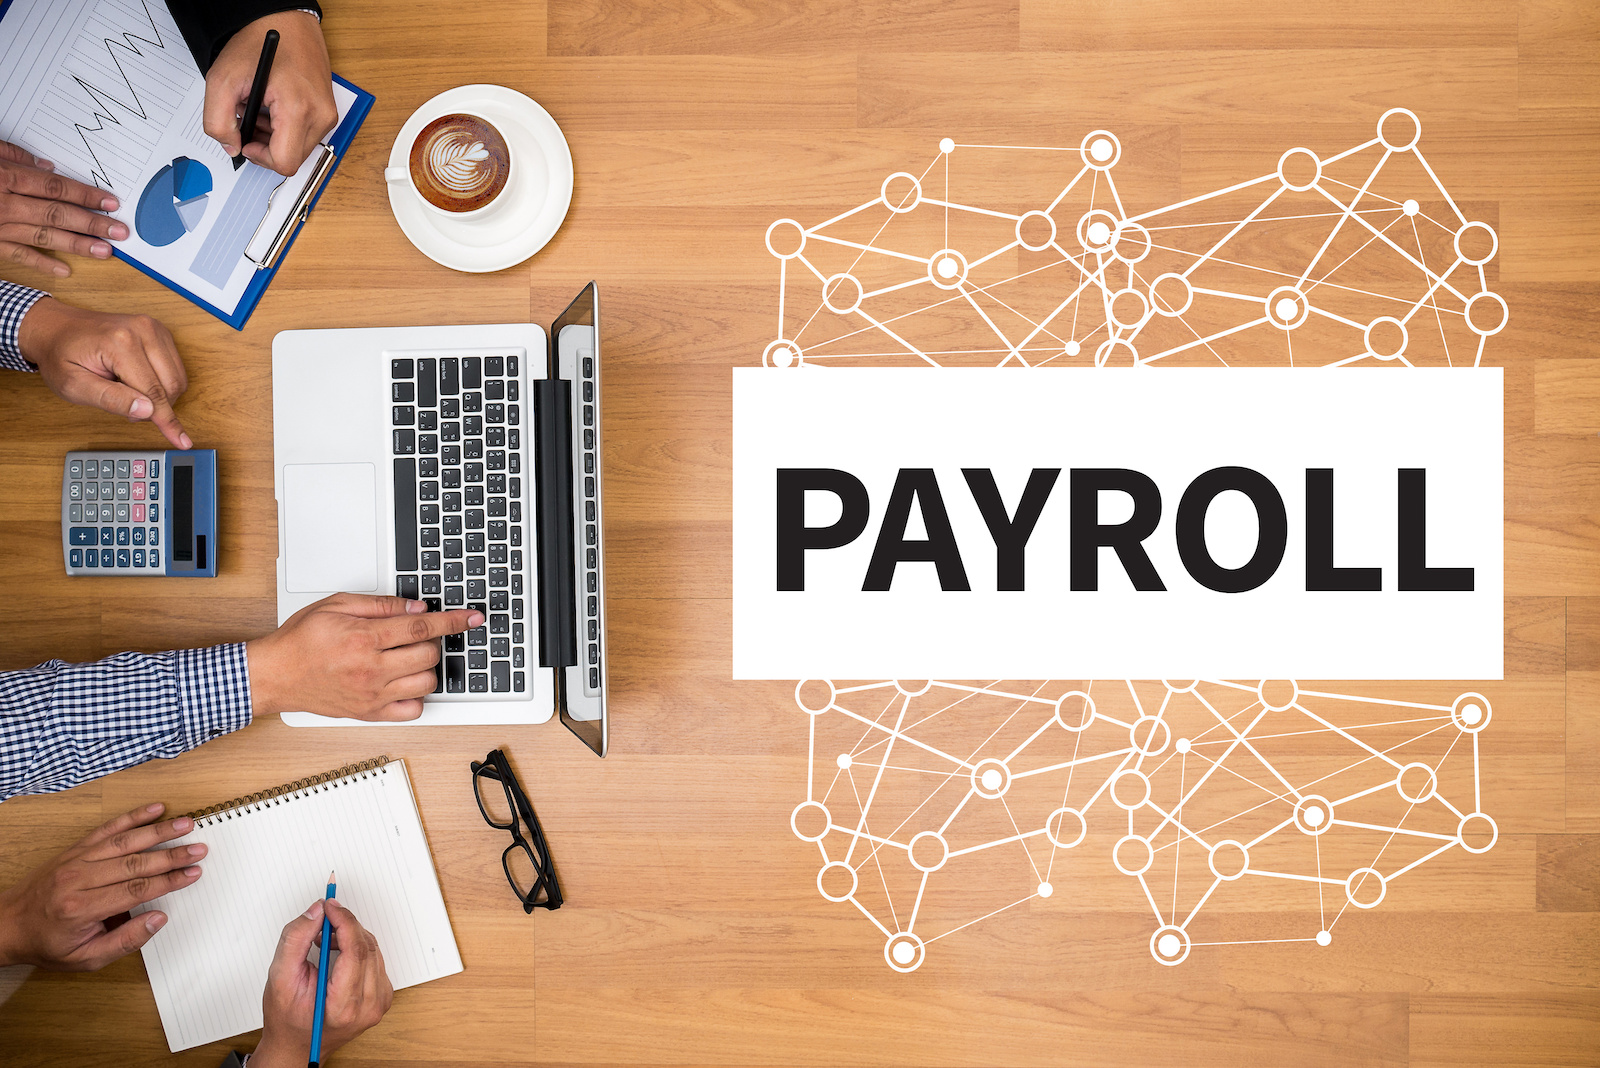 PAYROLL Business team hands at work with financial reports and a laptop